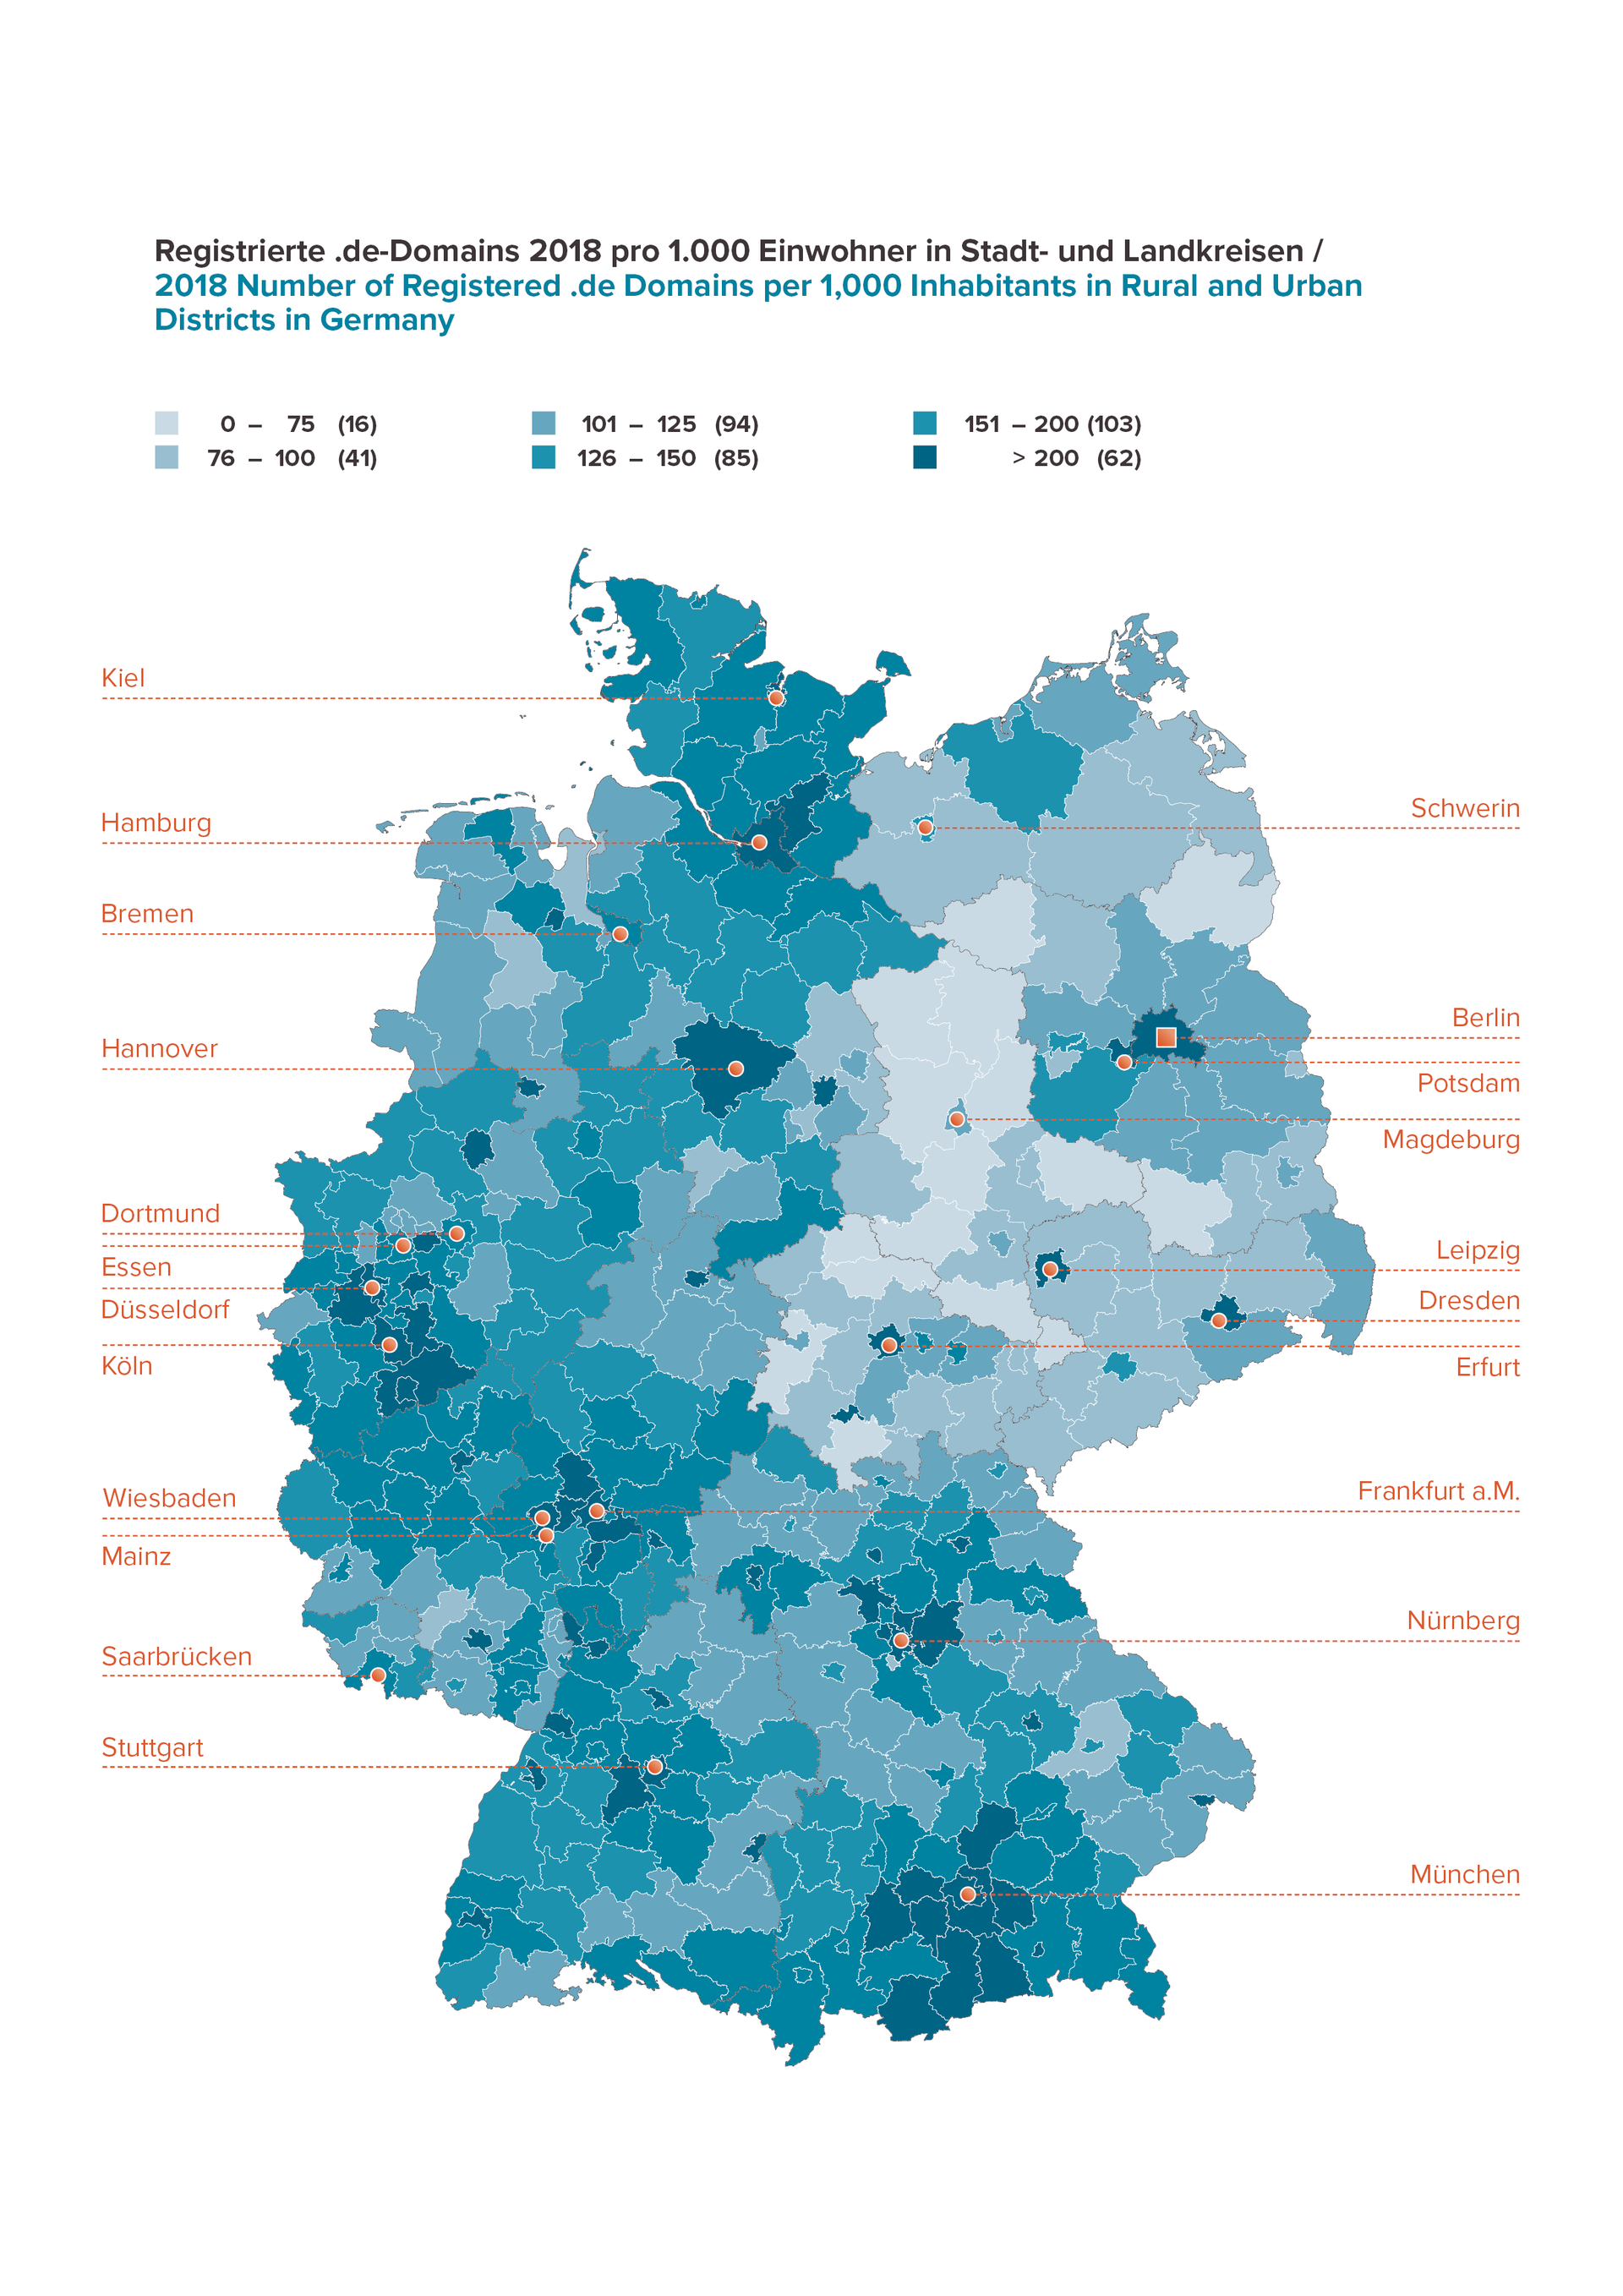 Number of Registered .de Domains per 1,000 Inhabitants in Rural and Urban District in Germany 2018